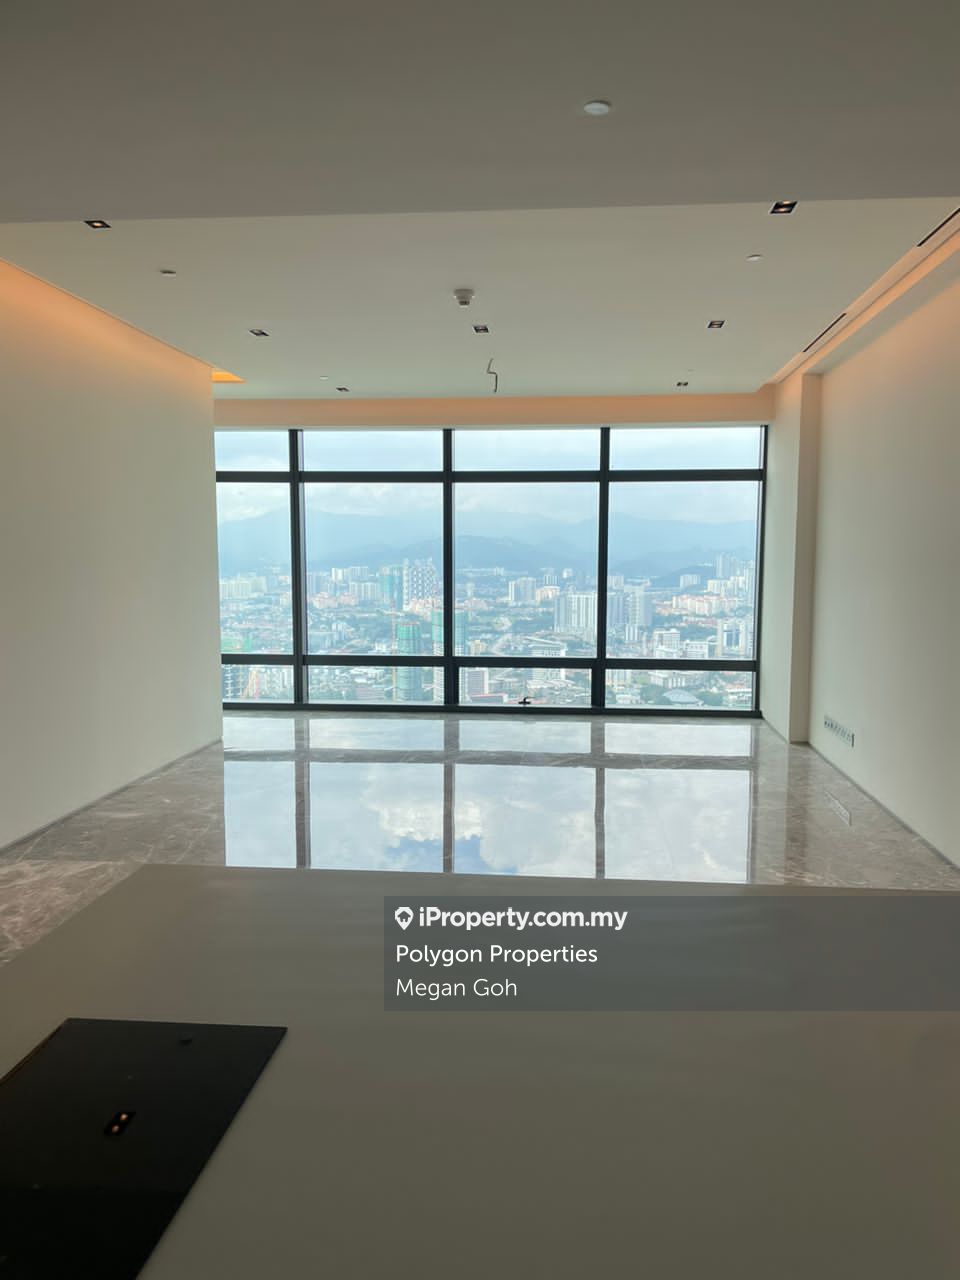 Four Seasons Place Condominium 3+1 bedrooms for sale in KLCC, Kuala ...